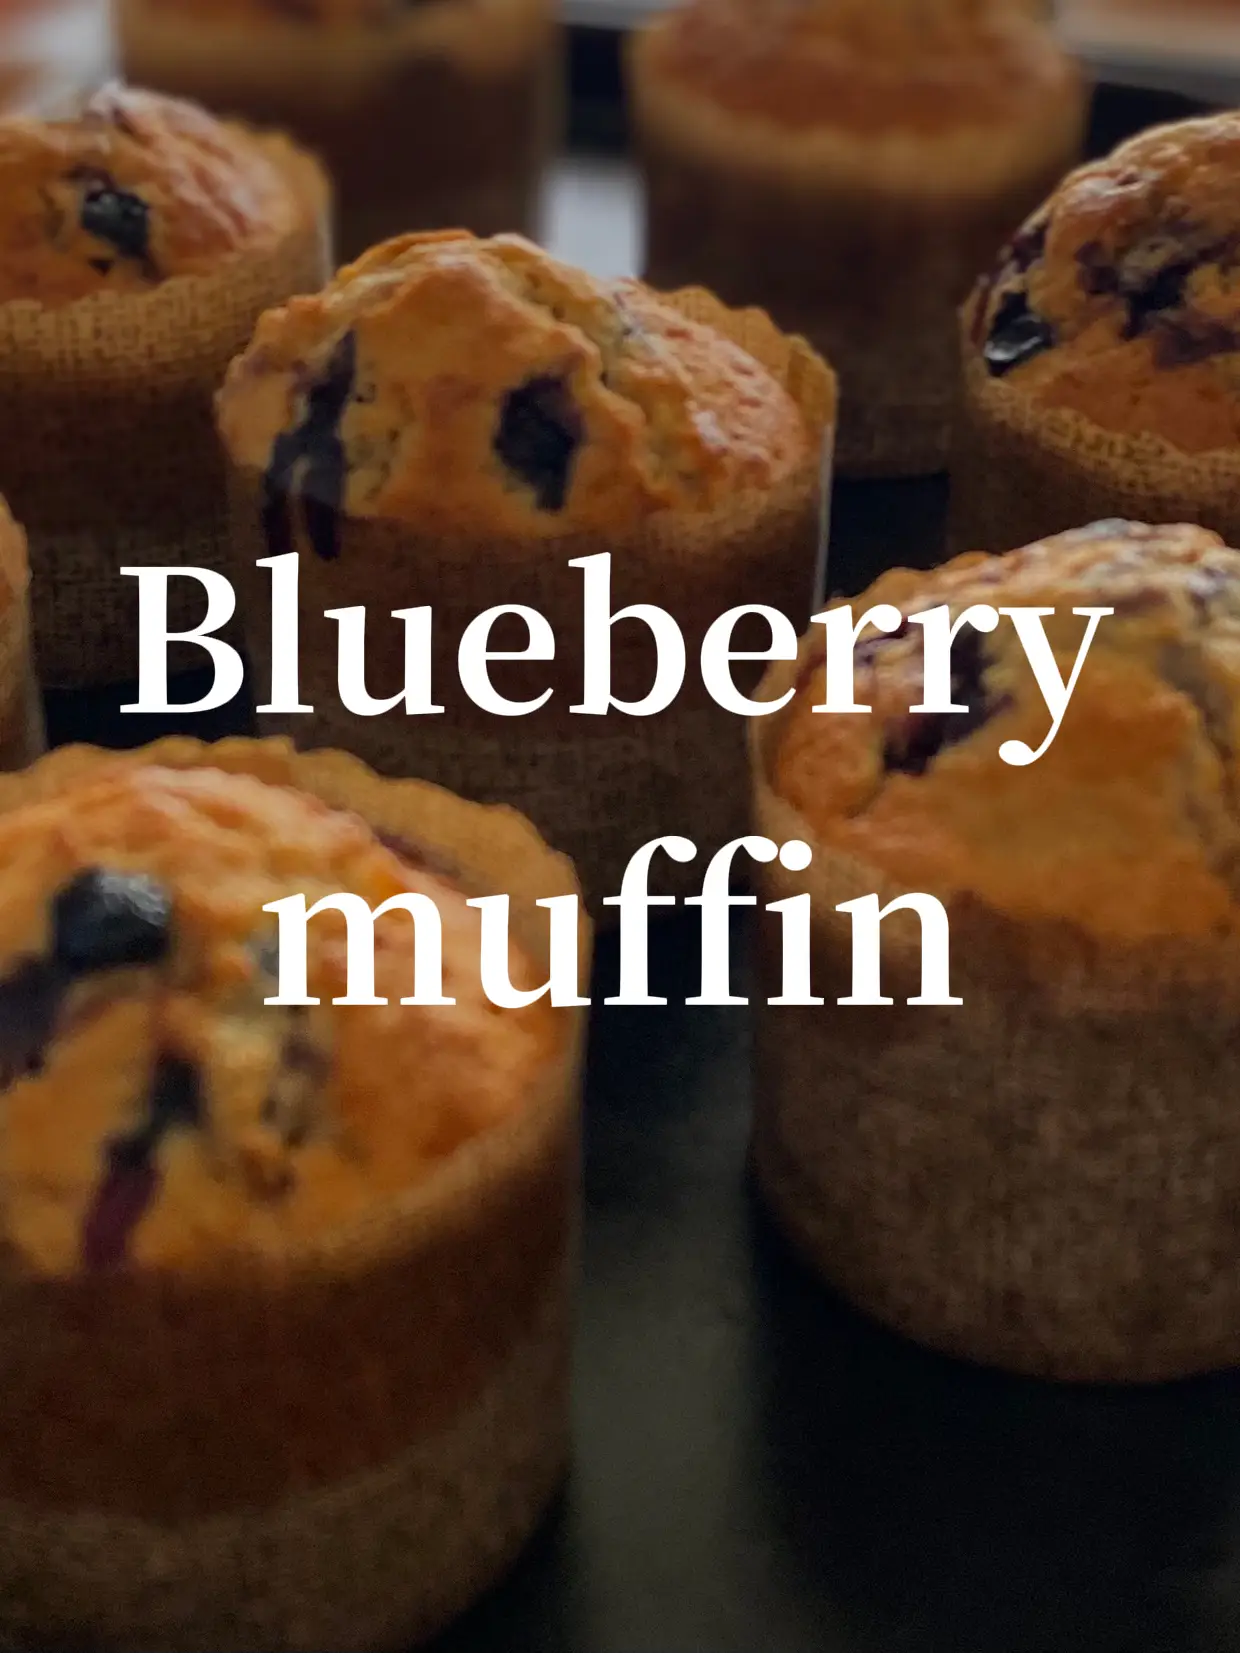 Crumb Topped Mini Blueberry Muffins Recipe - Emily Laurae